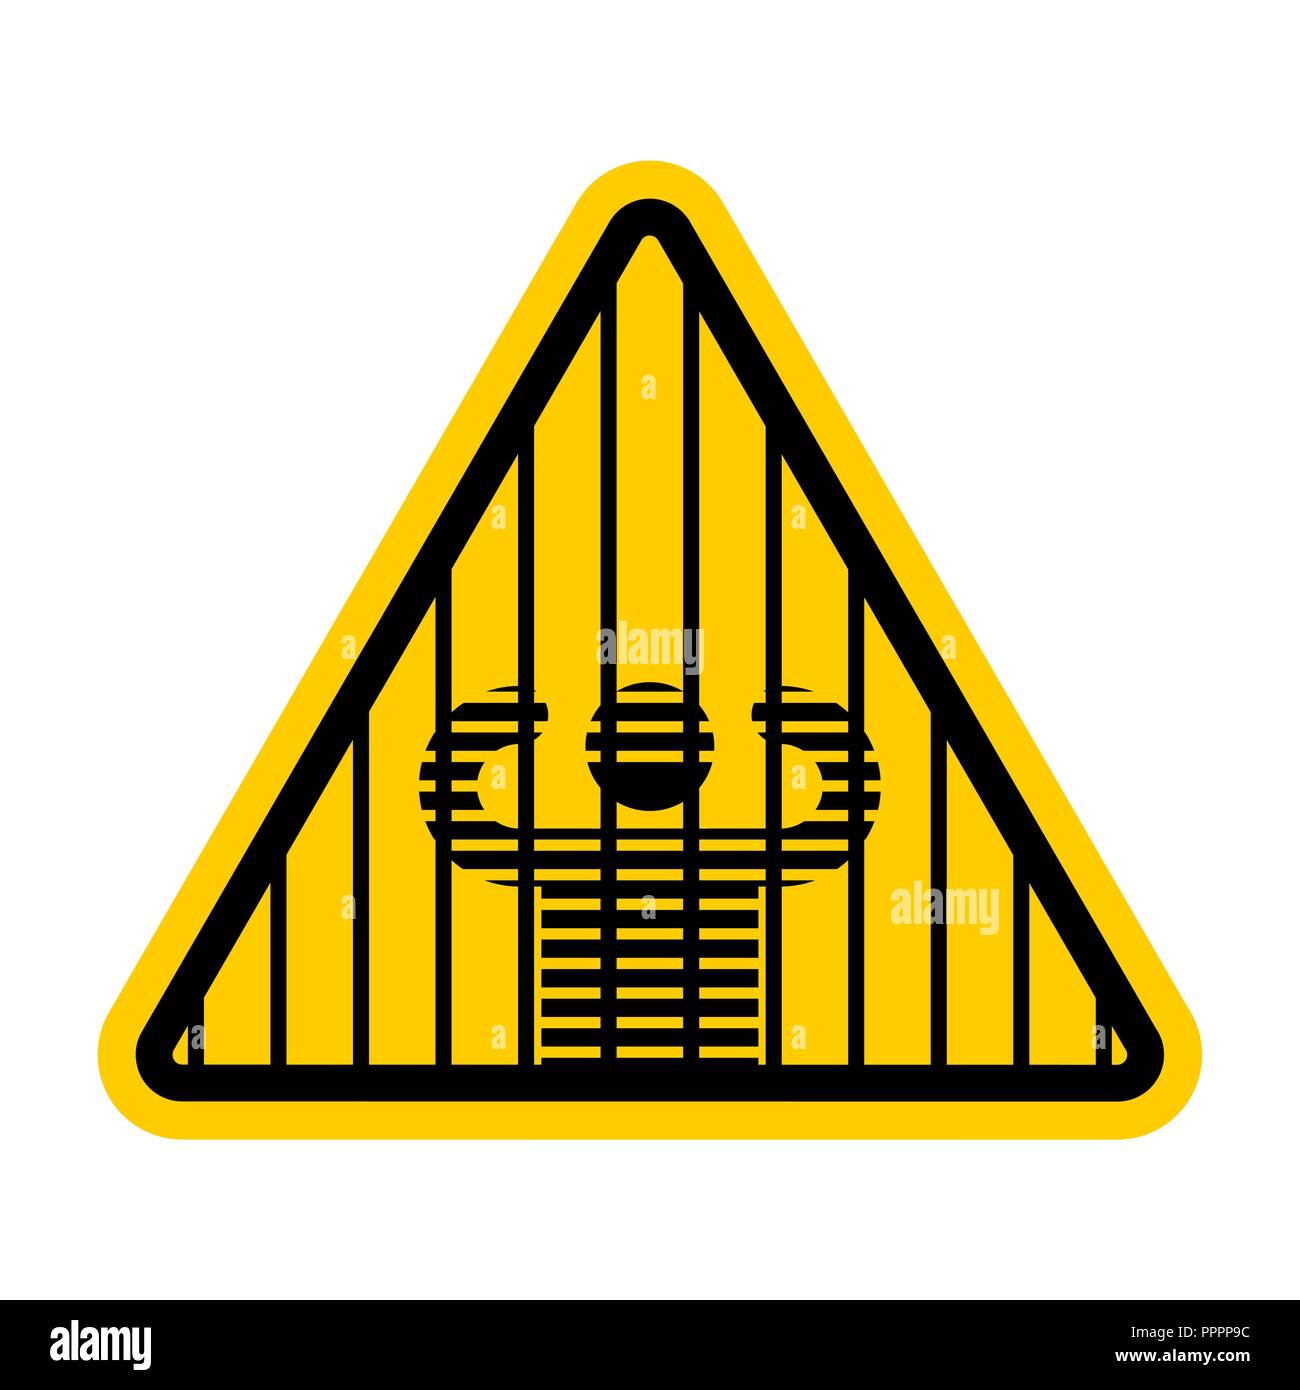 Attention prison. Caution jail. Yellow road sign. Warning Criminals Stock Vector